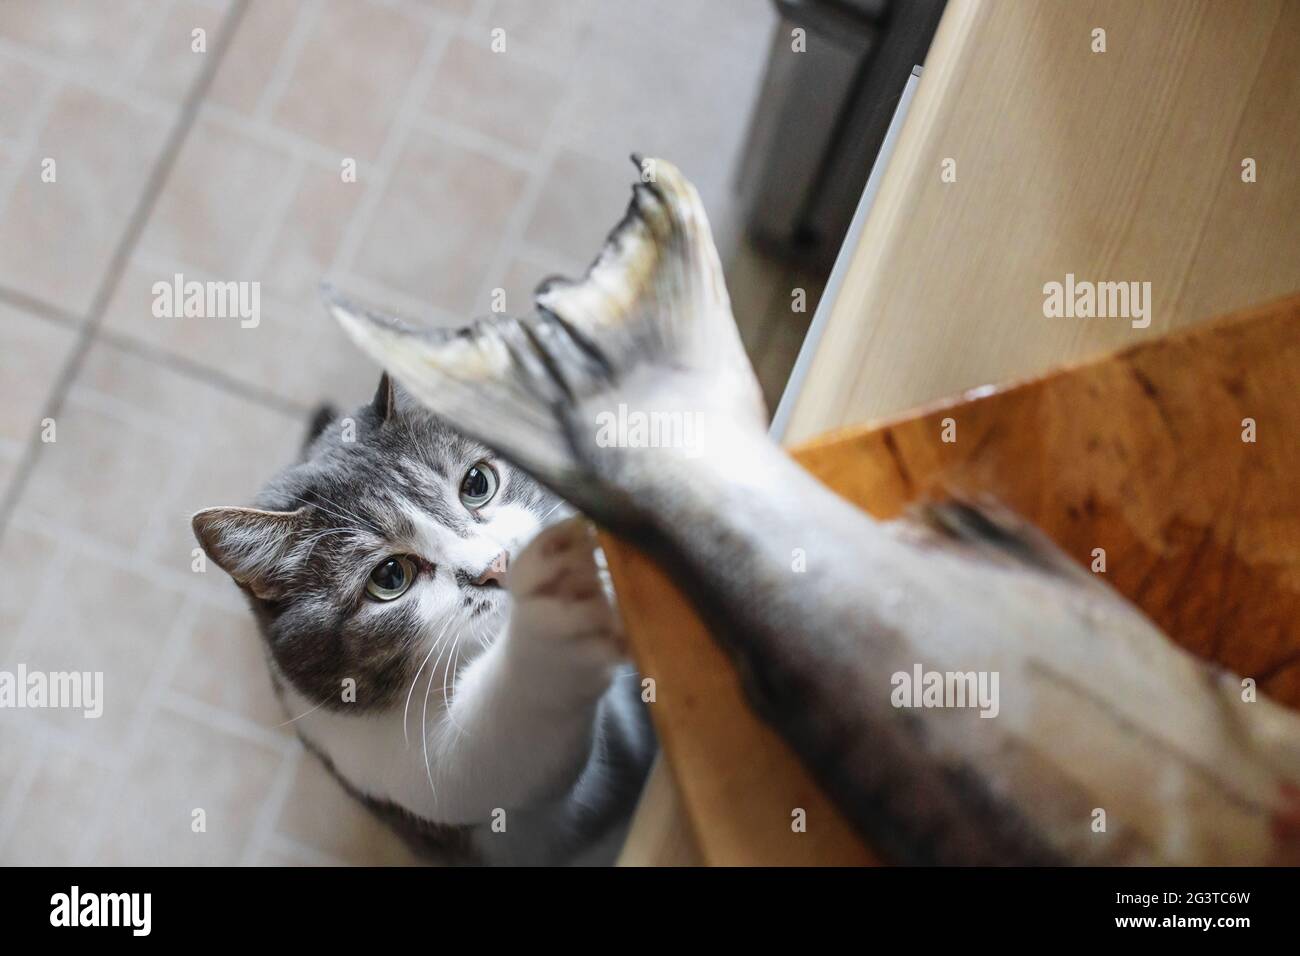 A hungry cat looks at the tail of a fish on the kitchen table. A pet steals food from the table. Stock Photo